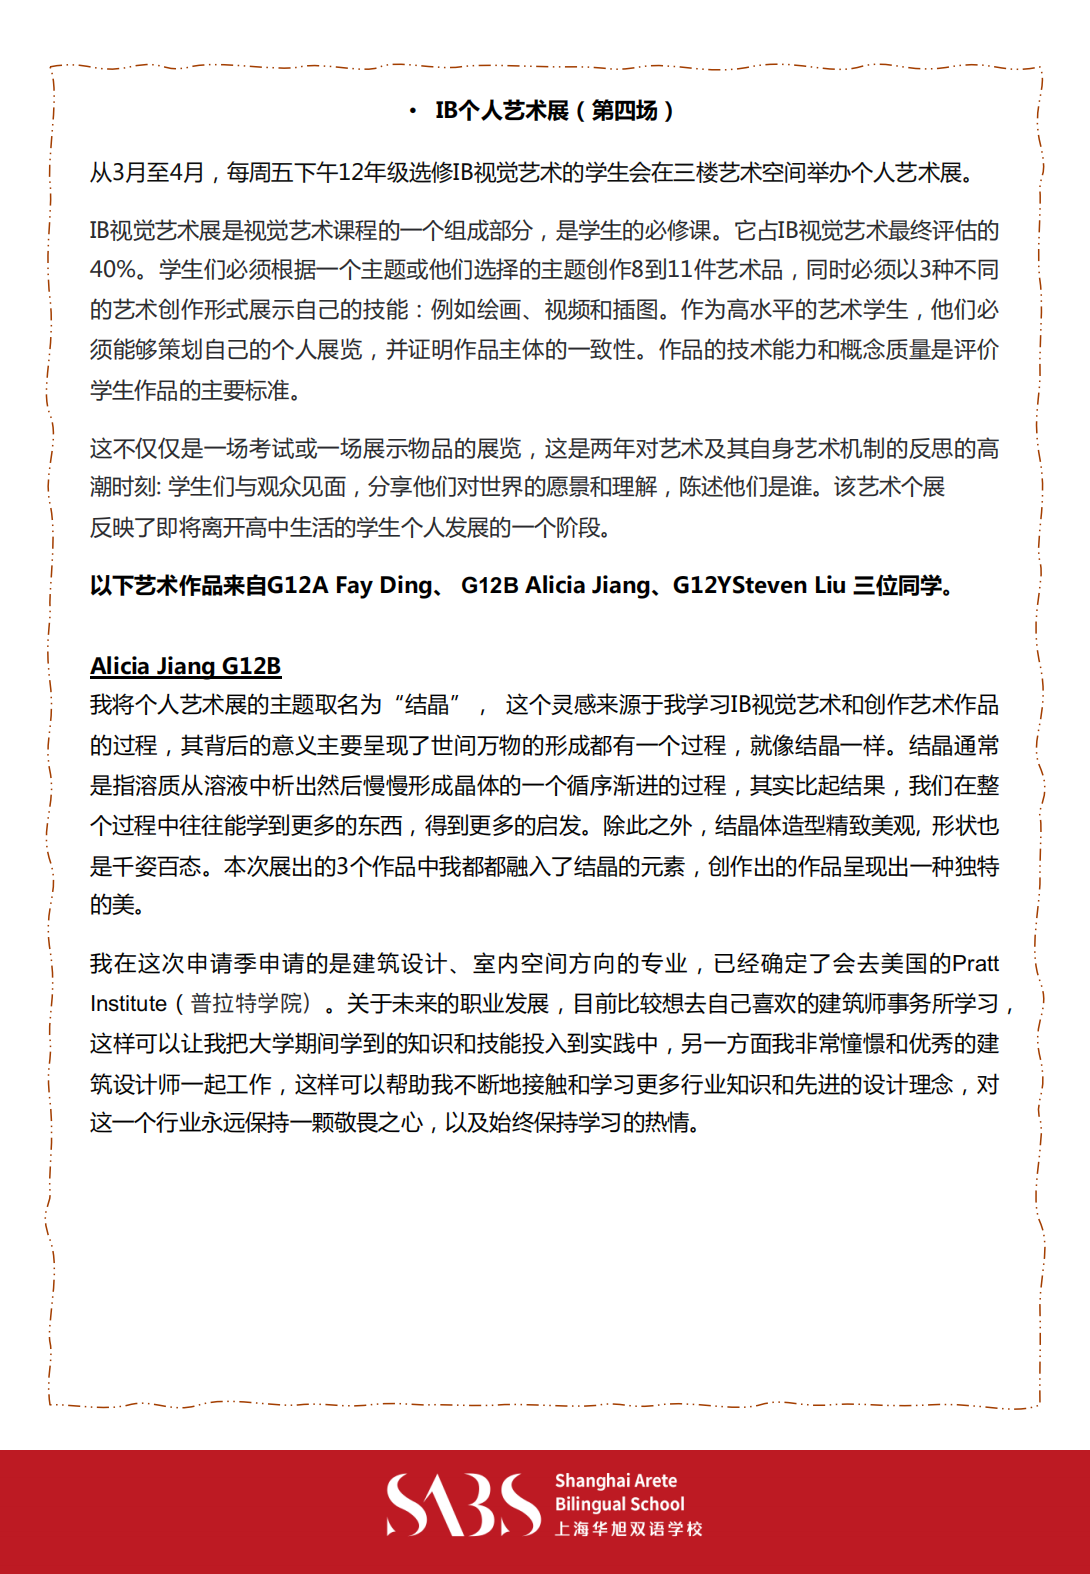 HS 5th Issue Newsletter pptx（Chinese)_07.png